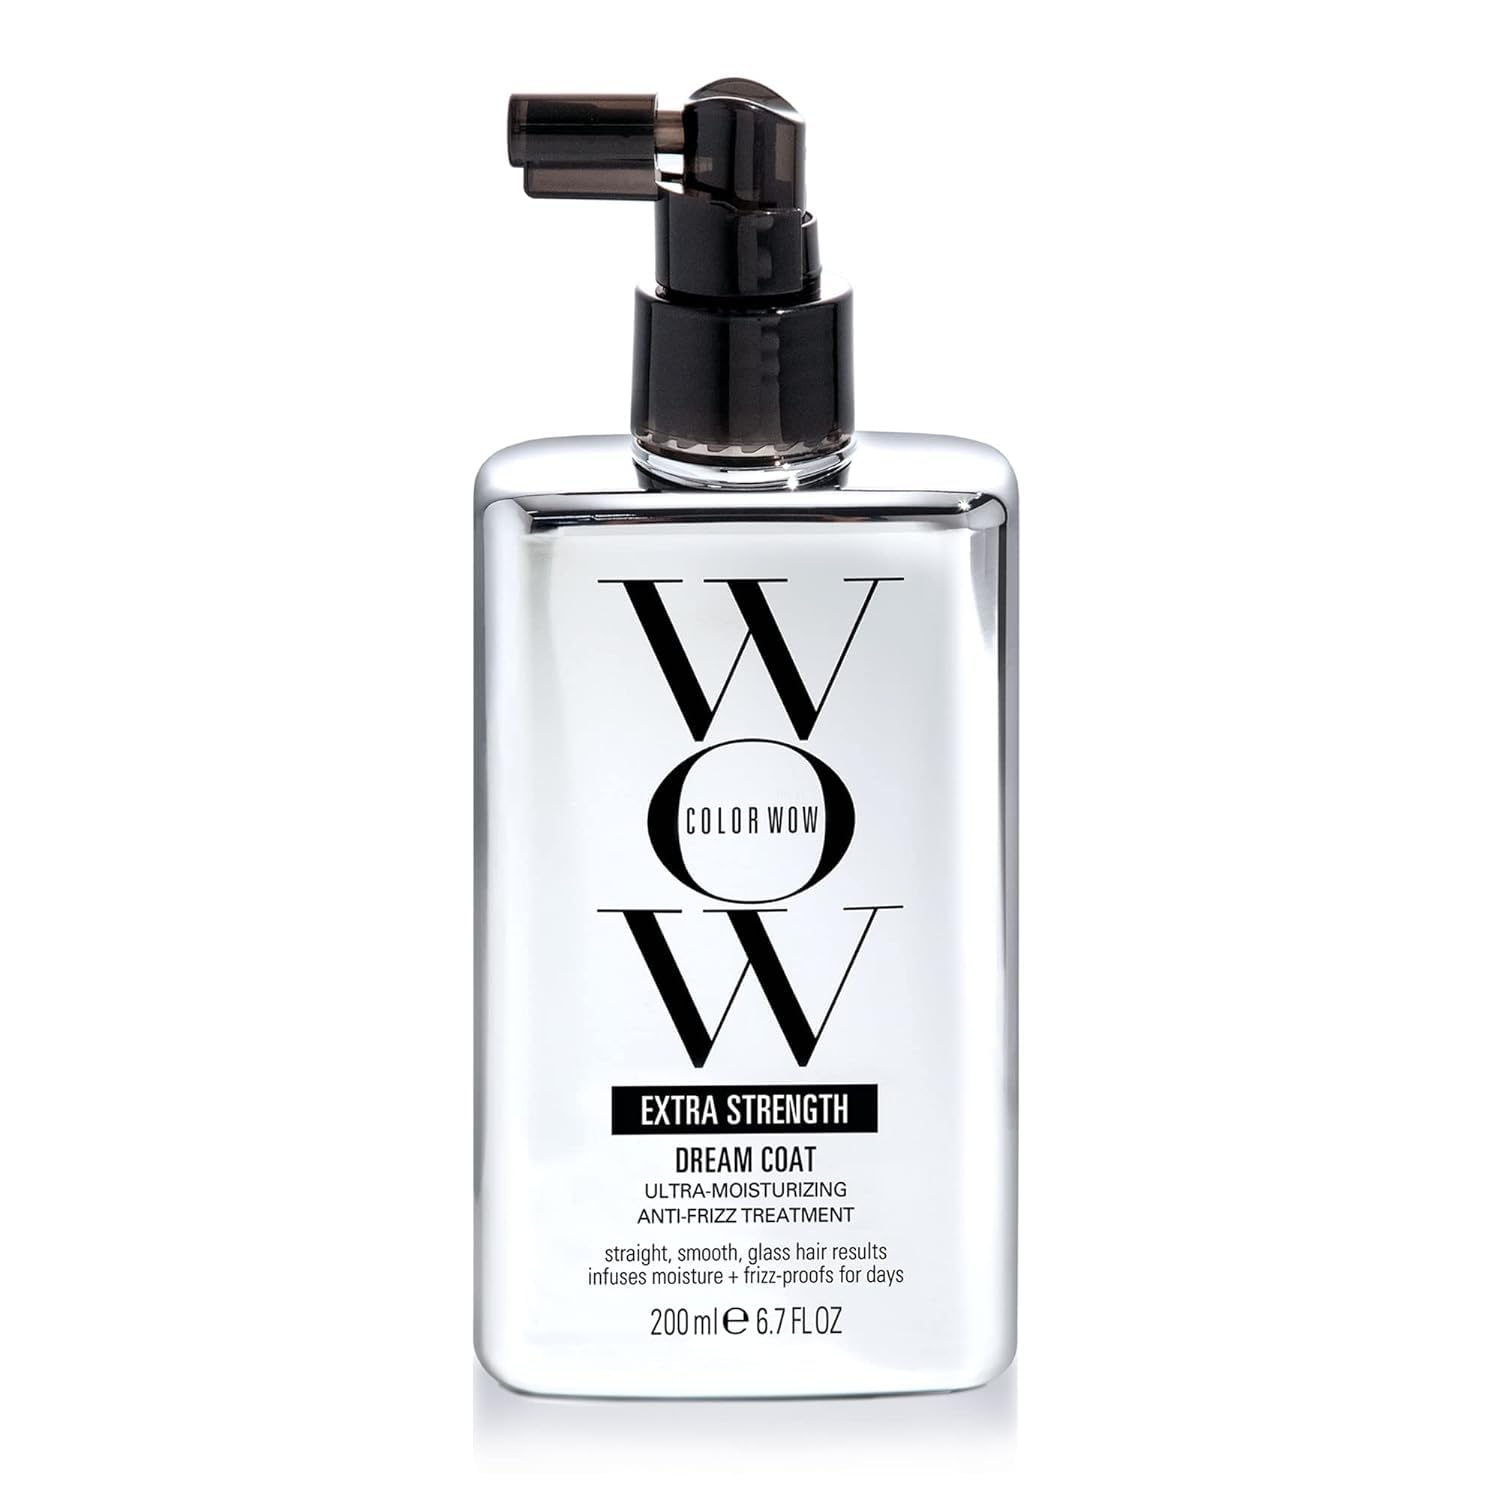 COLOR WOW Extra Strong Dream Coat, Powerful, Ultra Moisturising, Anti-Moisture Treatment for Extremely Frizzy Hair; Glazed Smooth, Smooth + Frizz-resistant Hairstyles for up to 3-4 Washes